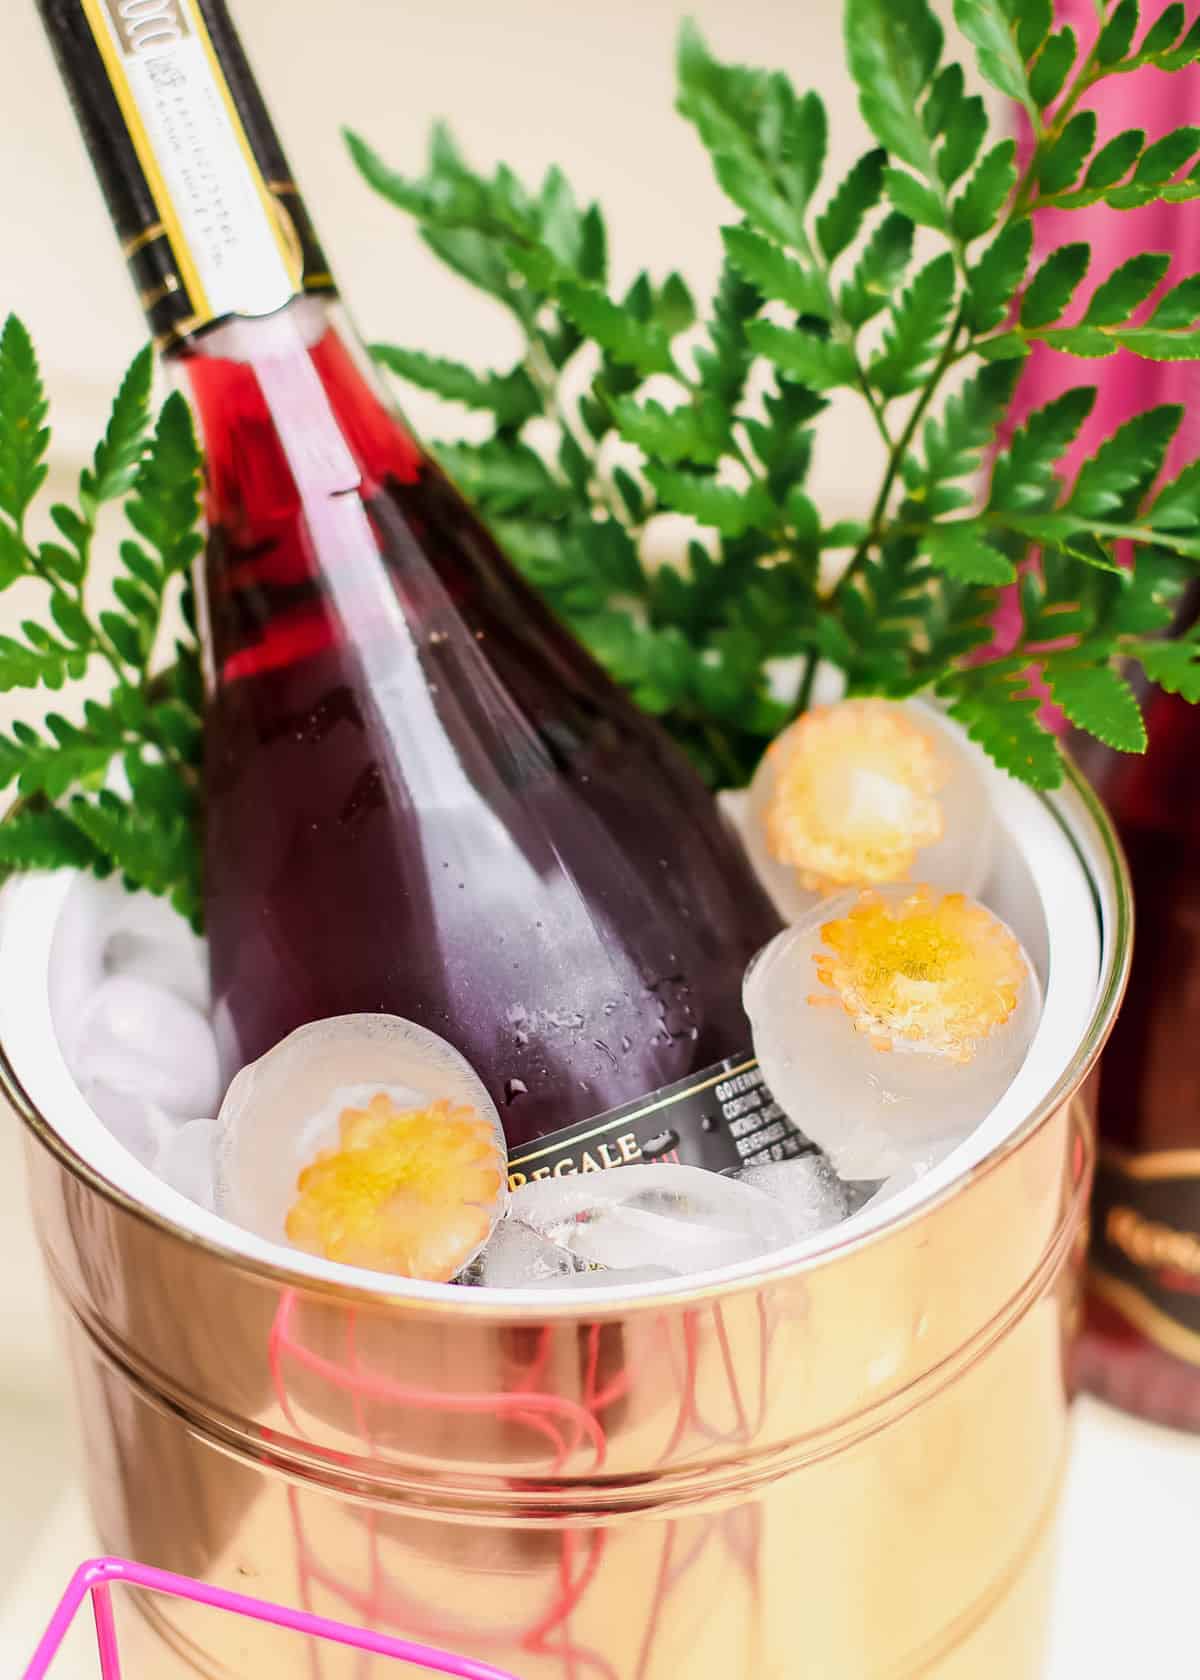 rose champagne in ice bucket with floral ice spheres and green ferns.